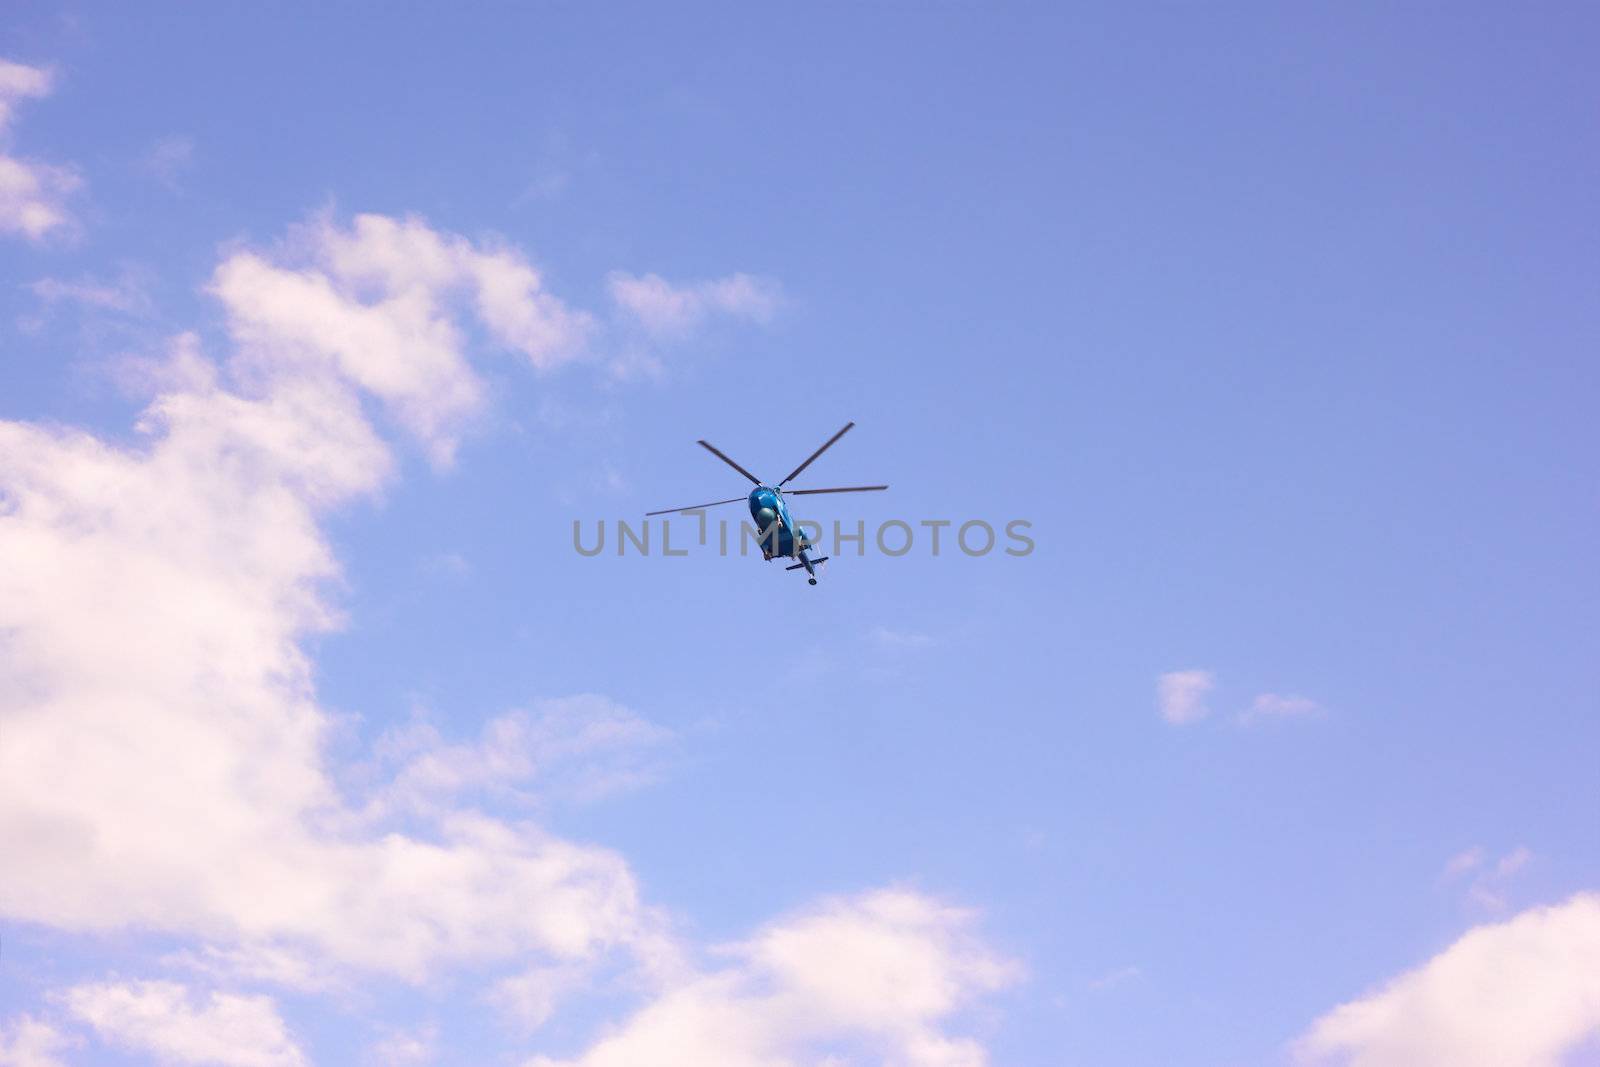 Helicopter flying against the background a blue sky with white clouds